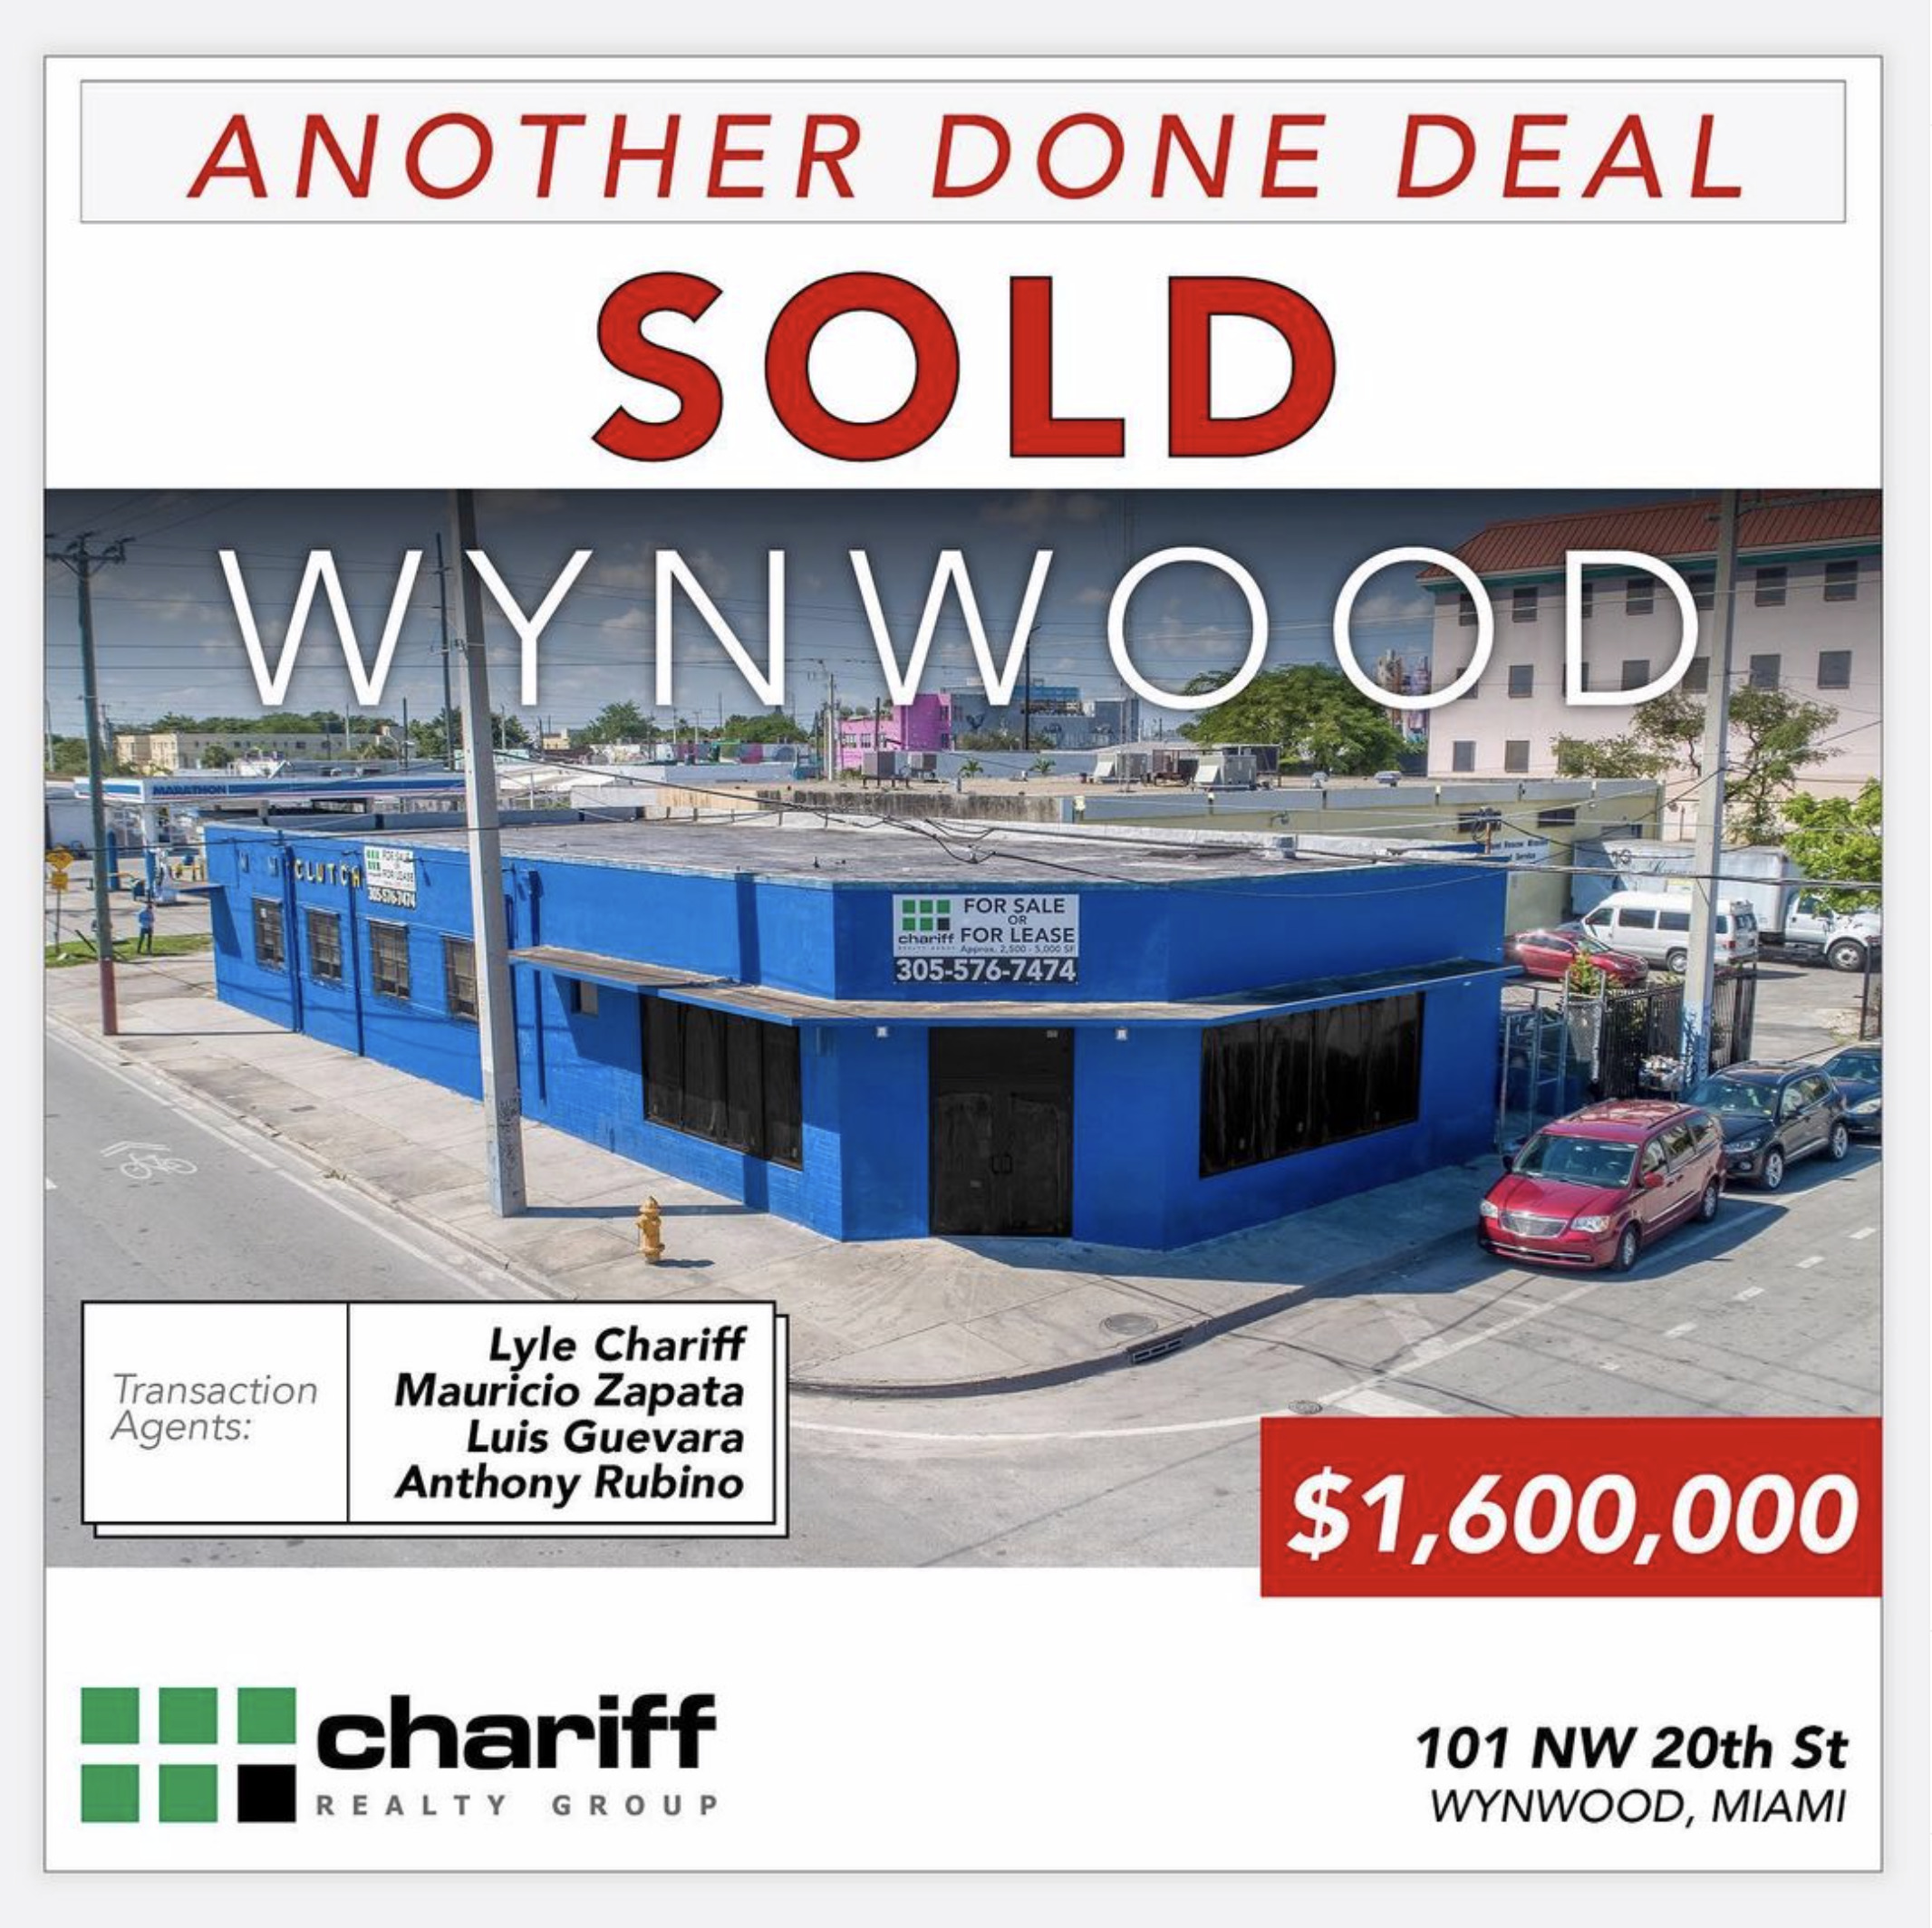 101 NW 20th St - Another Done Deal-Sold-Wynwood-Miami-Florida-33127-Chariff Realty Group